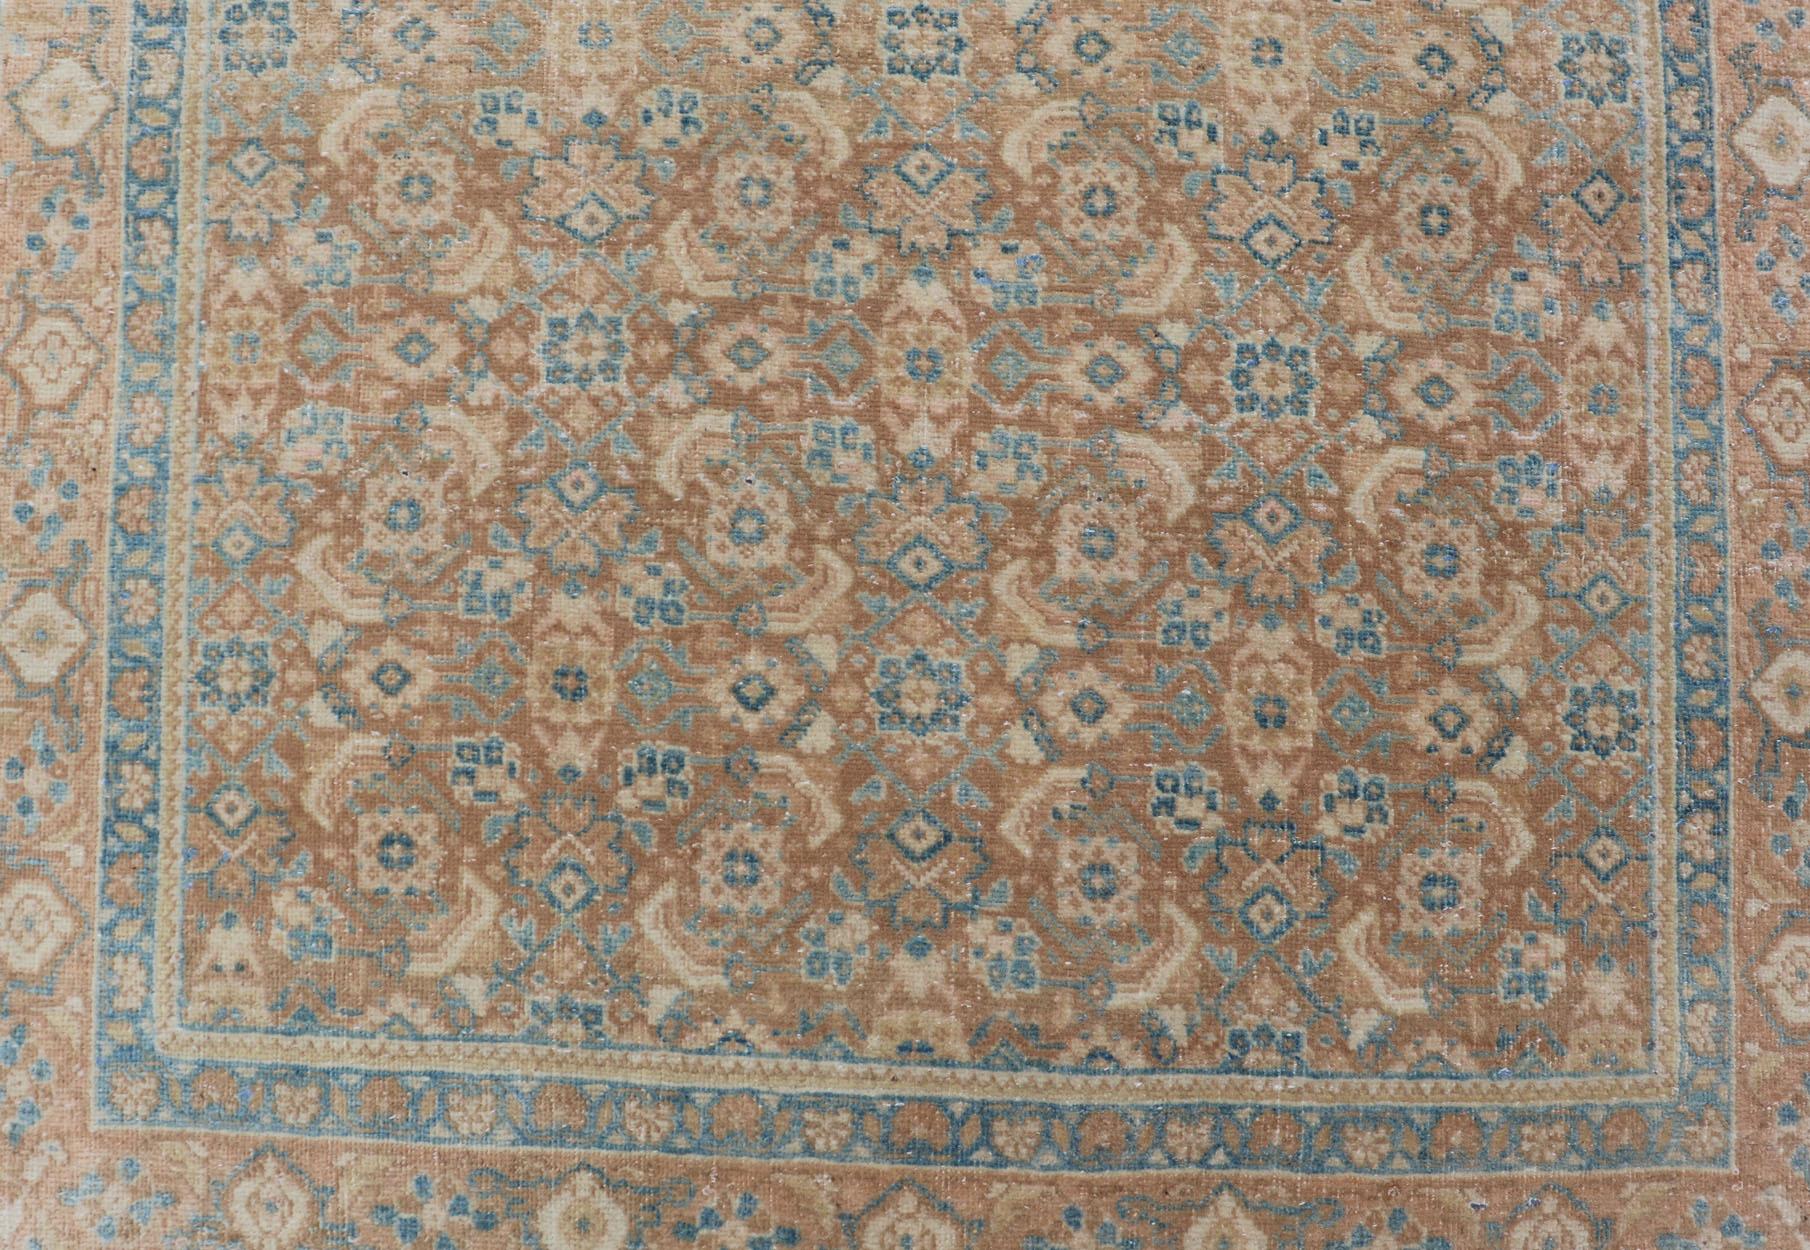 Measures: 3'4 x 11'0 
Vintage Persian Tabriz Runner with All-Over Floral Design in Tan and Blue. Keivan Woven Arts / rug EN-14502, country of origin / type: Iran / Tabriz, circa 1950

This Persian runner with a sophisticated, all-over design